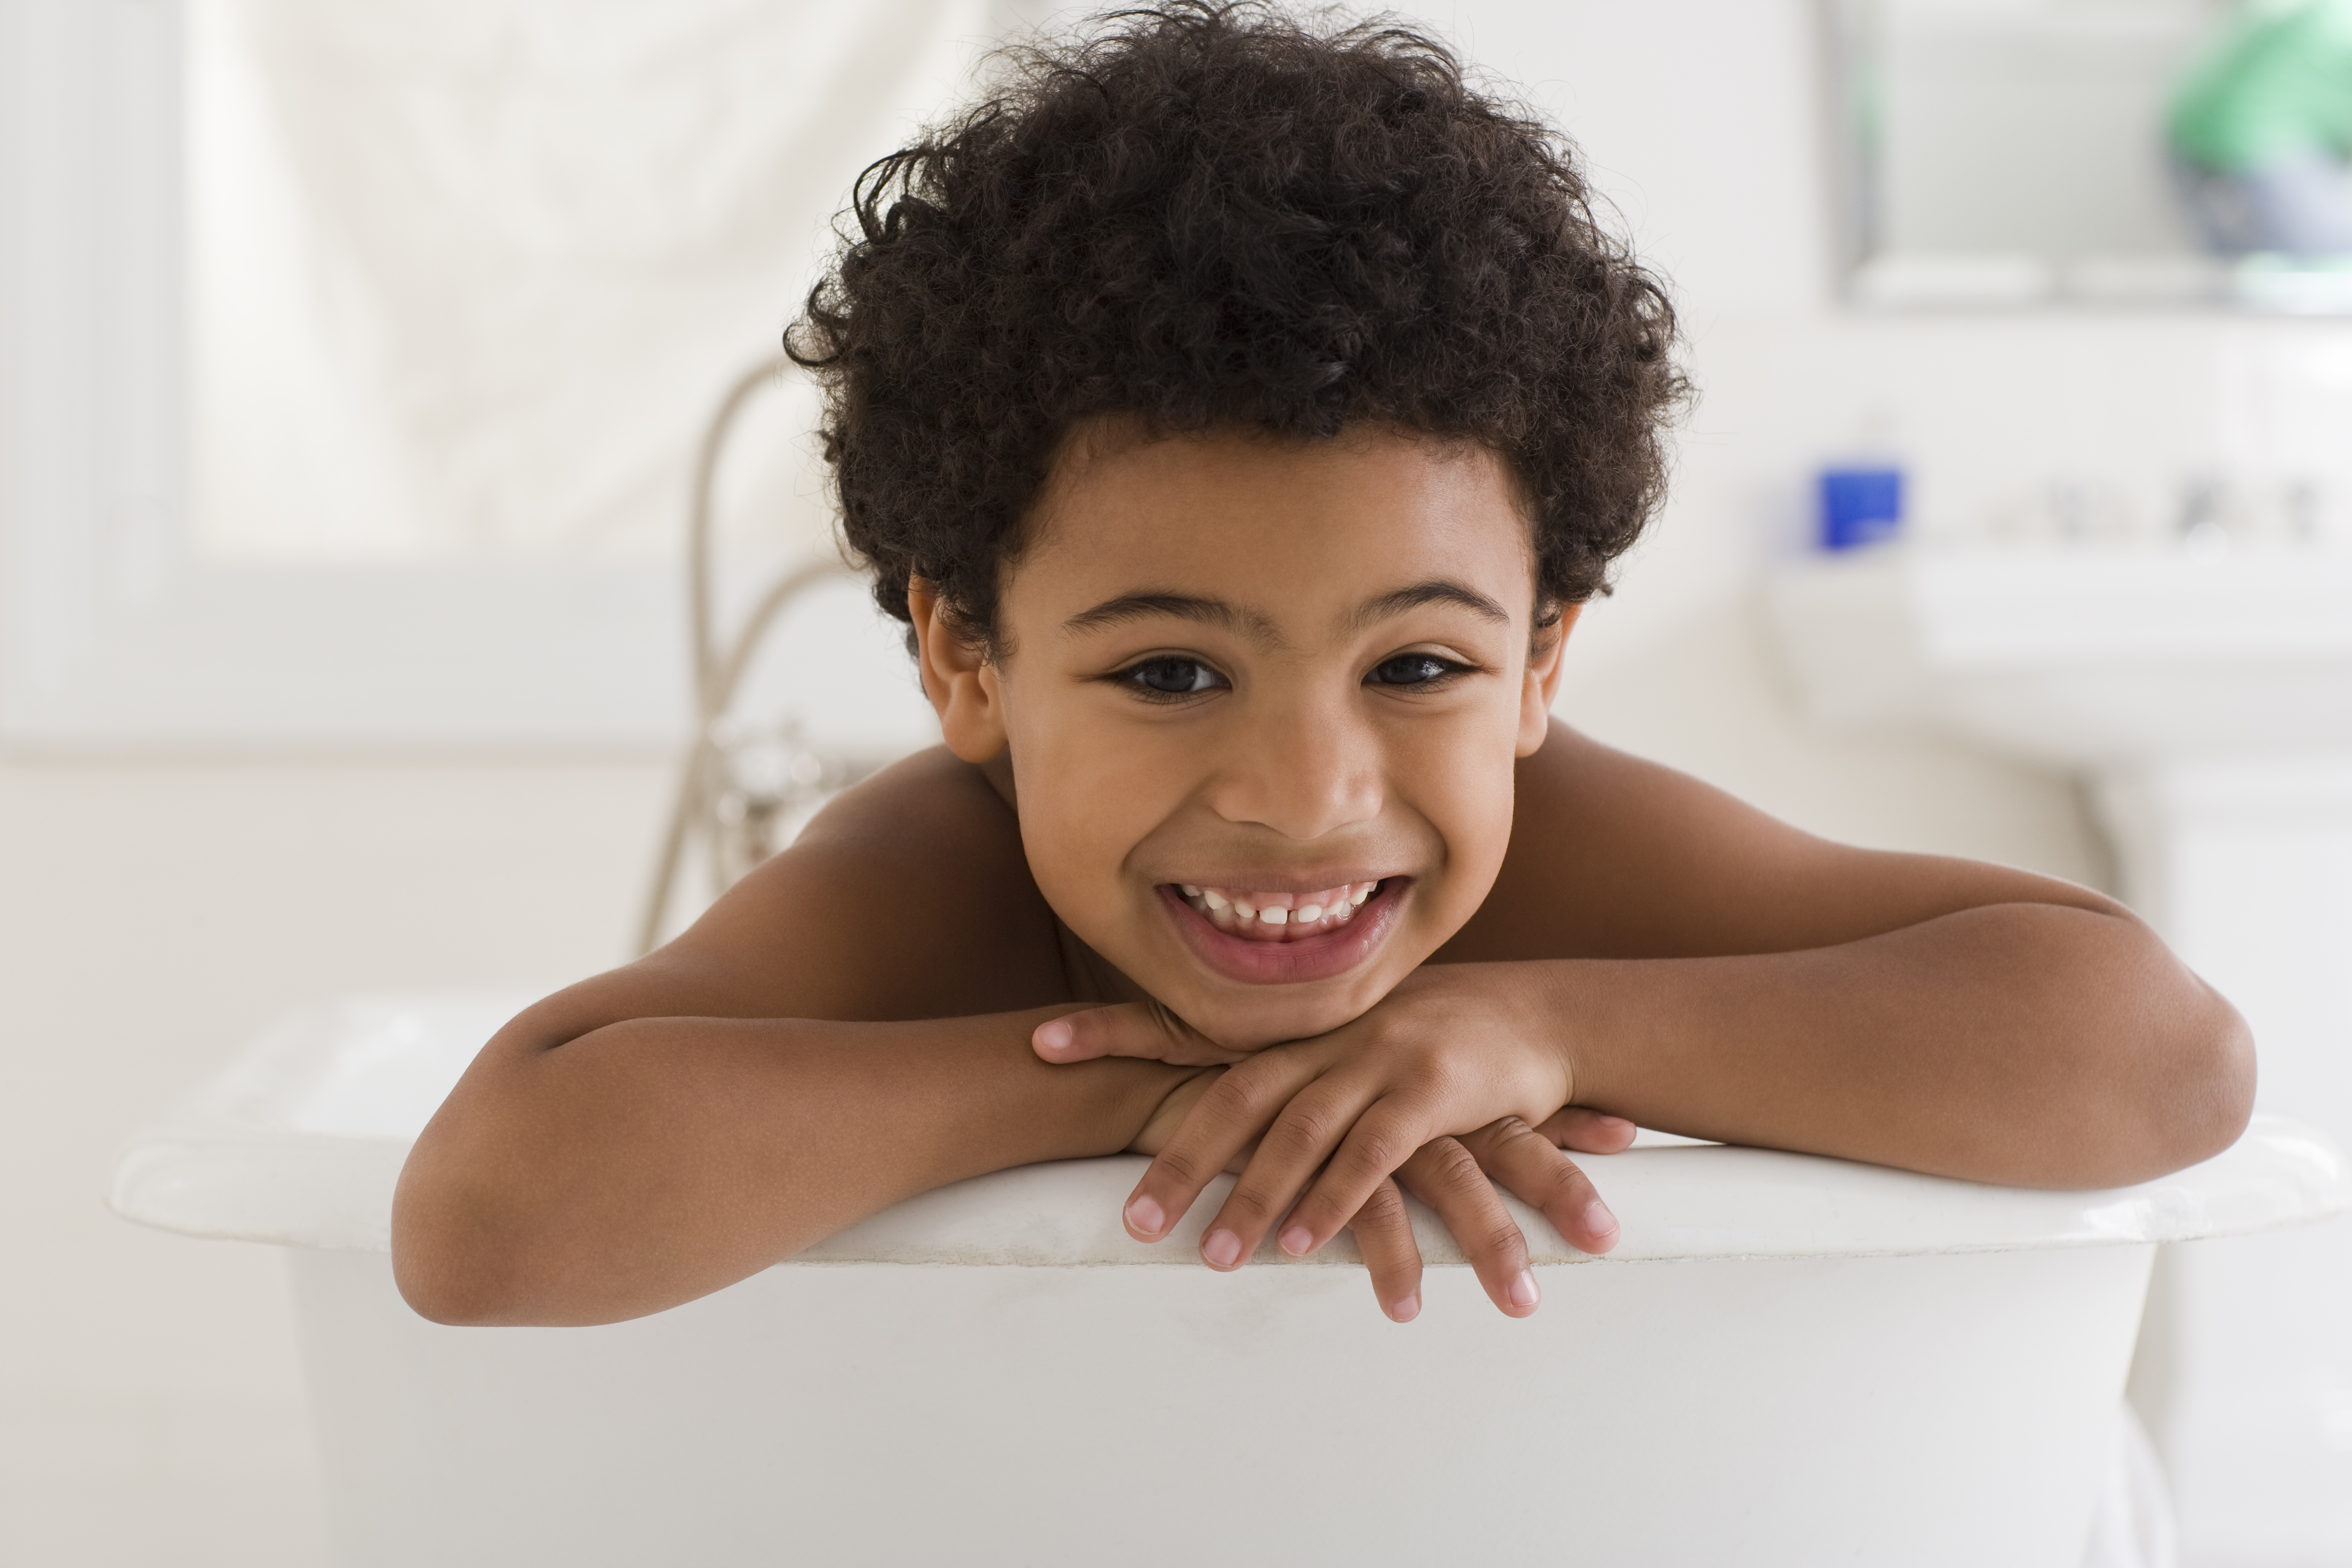 A Guide to Skin Care for Kids